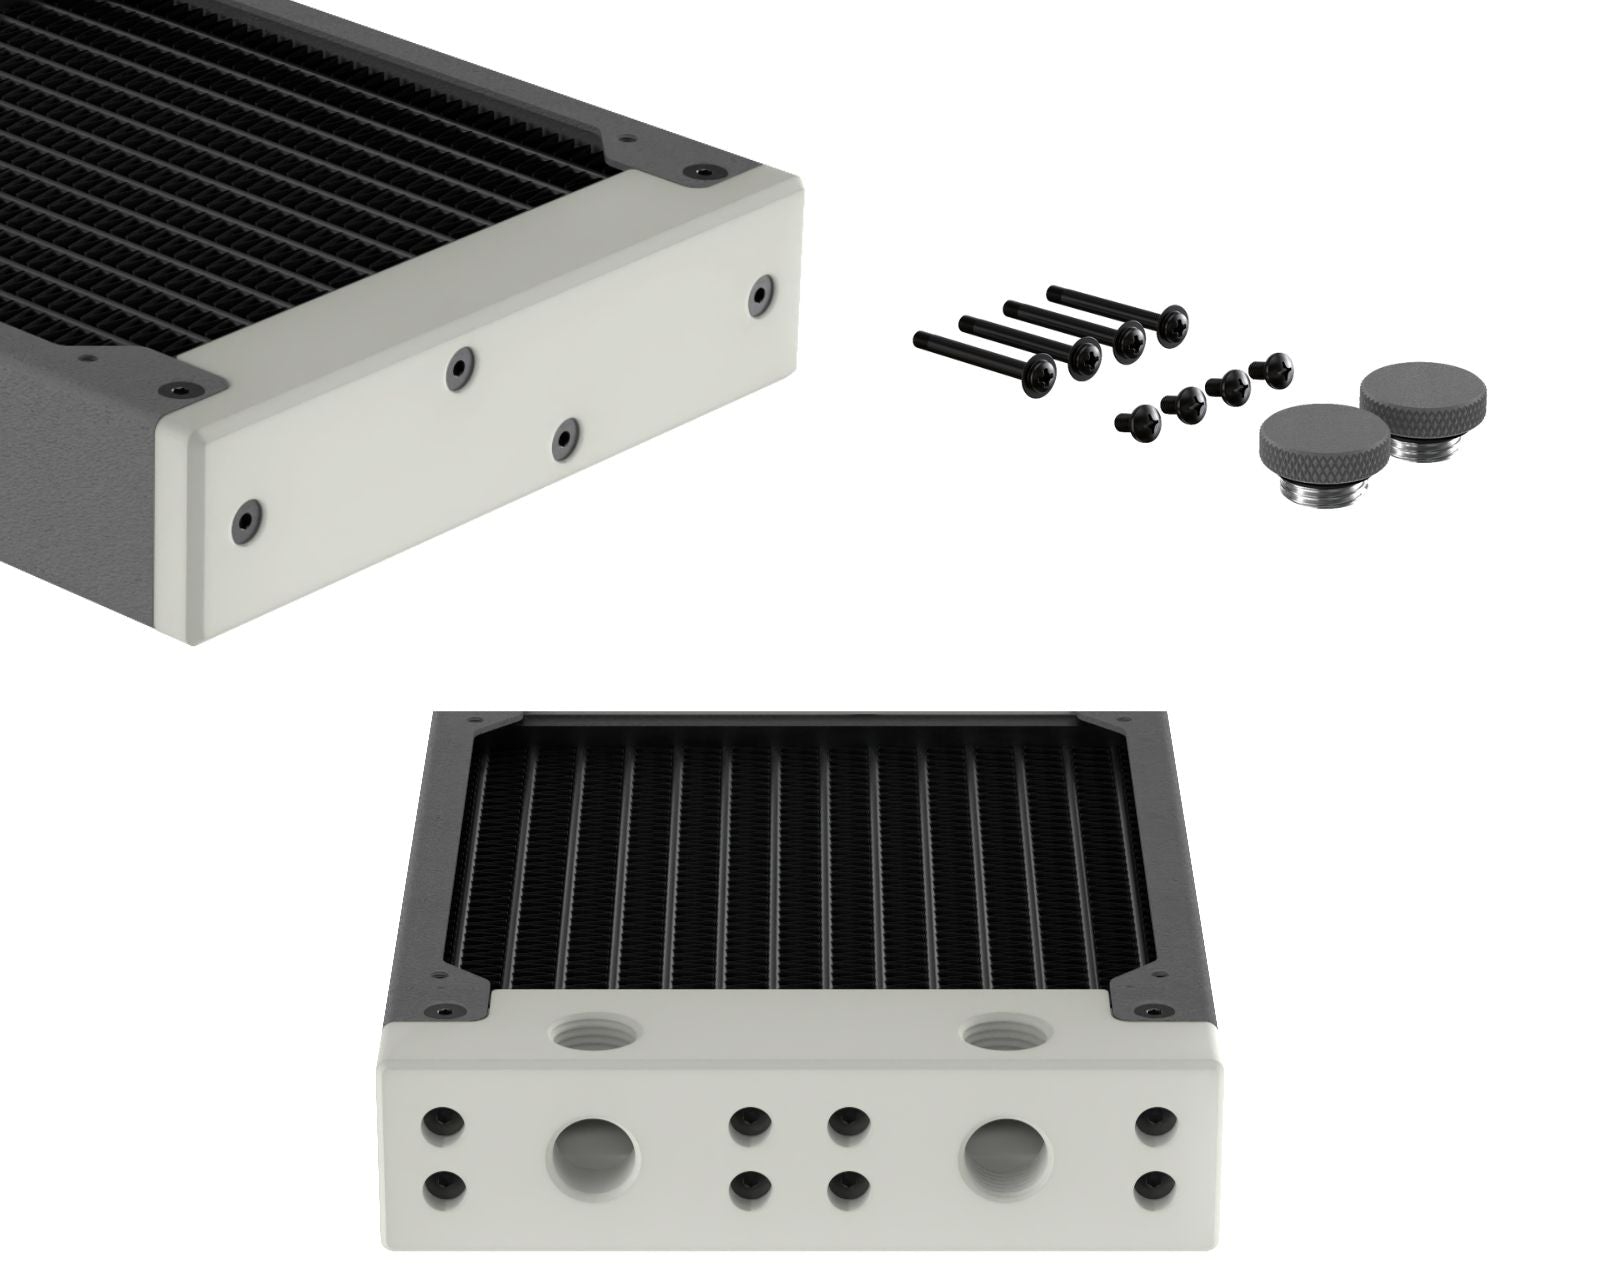 PrimoChill 120SL (30mm) EXIMO Modular Radiator, White POM, 1x120mm, Single Fan (R-SL-W12) Available in 20+ Colors, Assembled in USA and Custom Watercooling Loop Ready - TX Matte Gun Metal